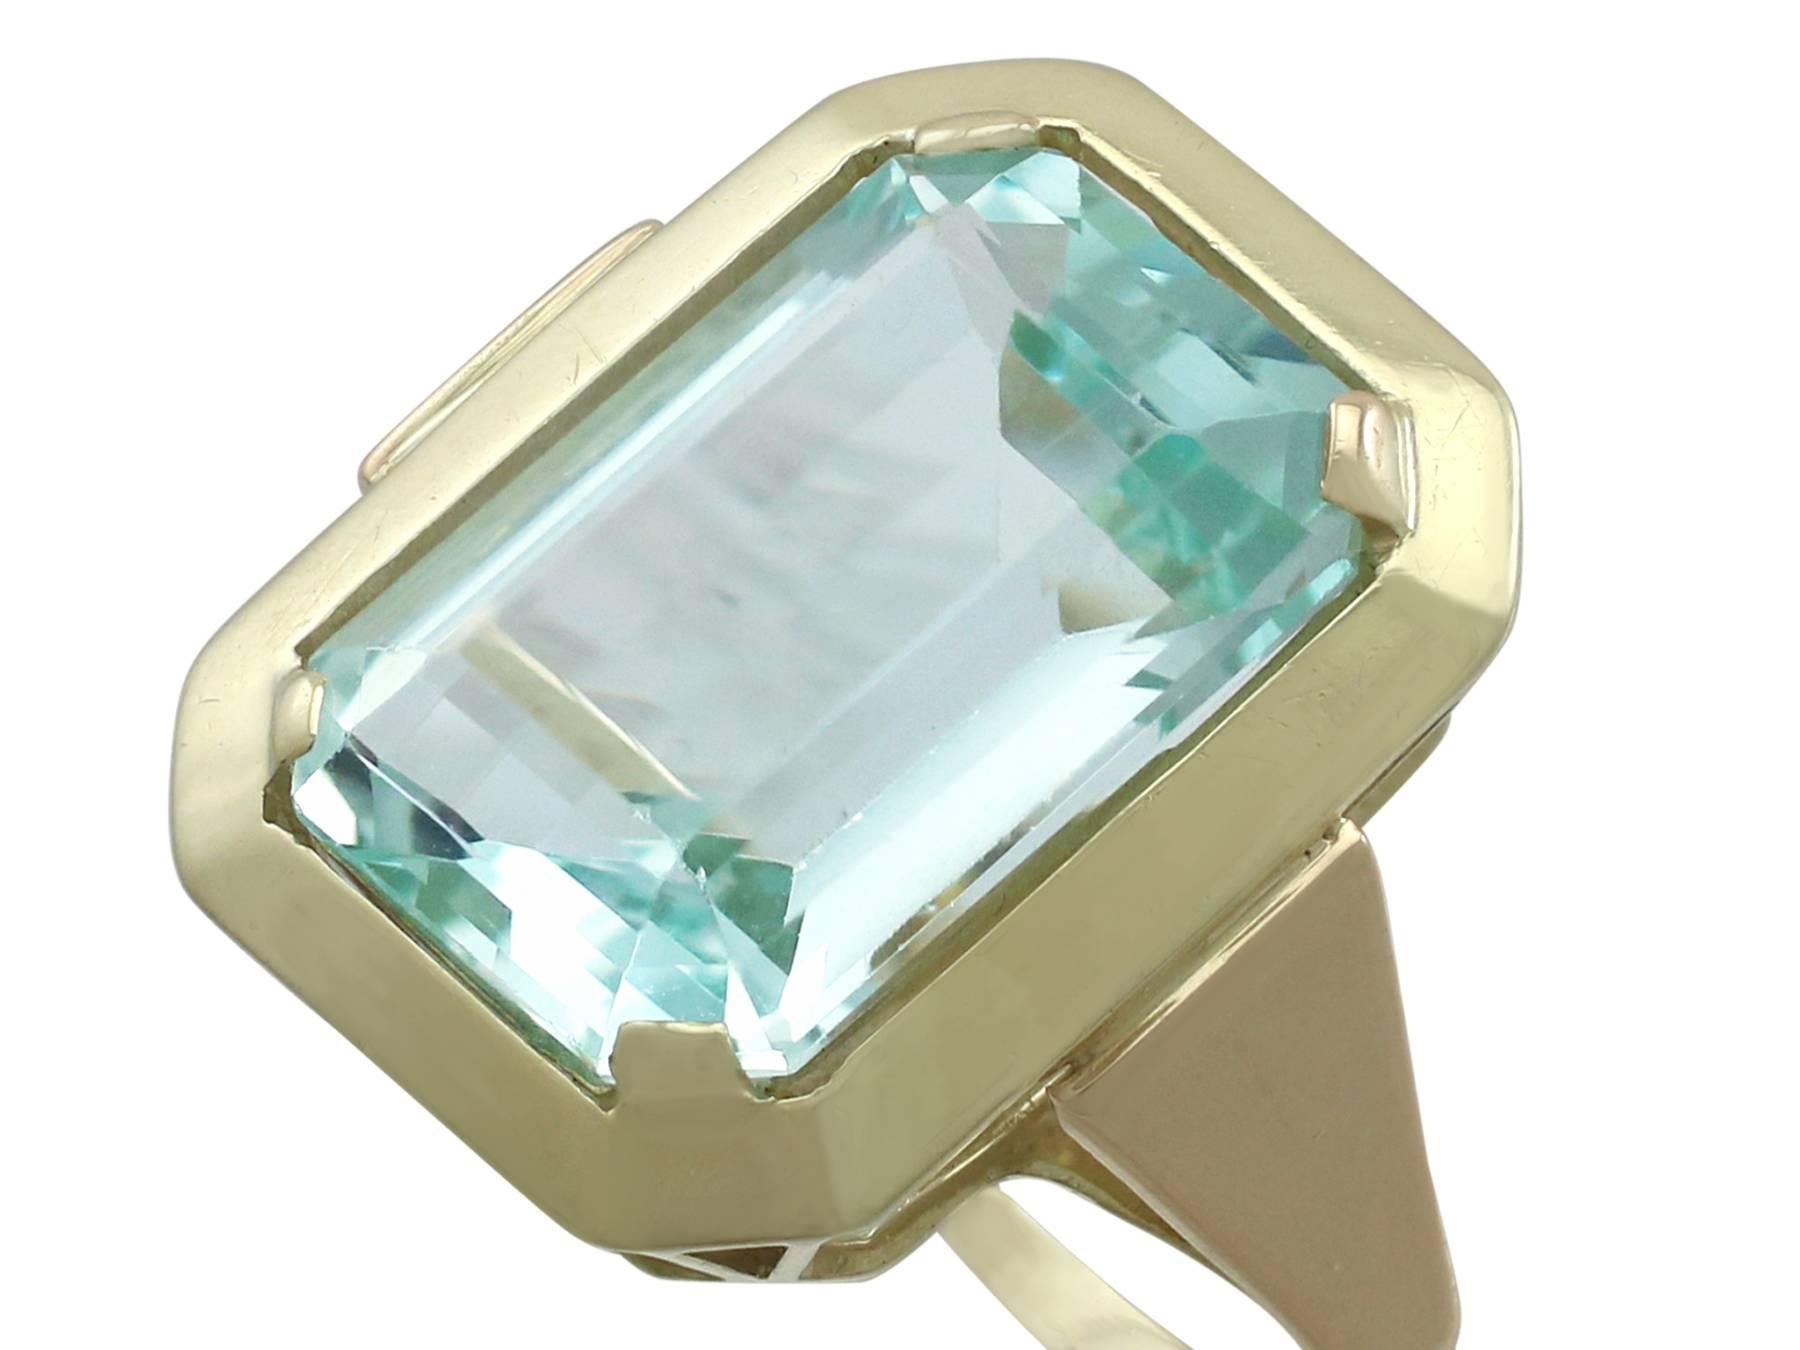 Emerald Cut Vintage 9.16 Carat Aquamarine and Yellow Gold Cocktail Ring